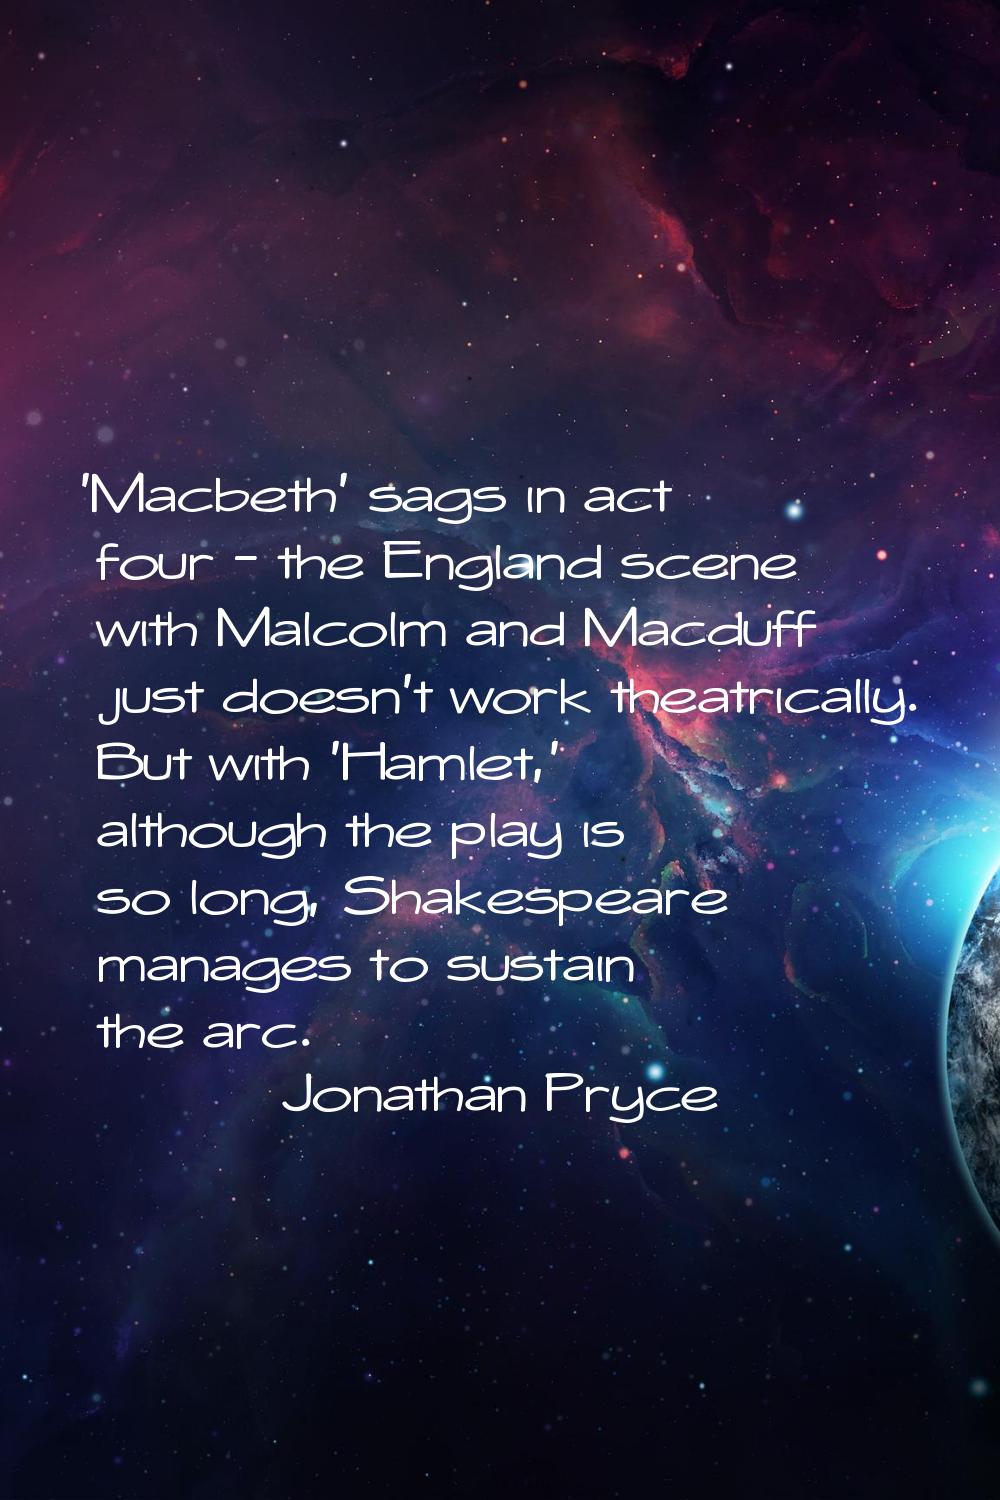 'Macbeth' sags in act four - the England scene with Malcolm and Macduff just doesn't work theatrica